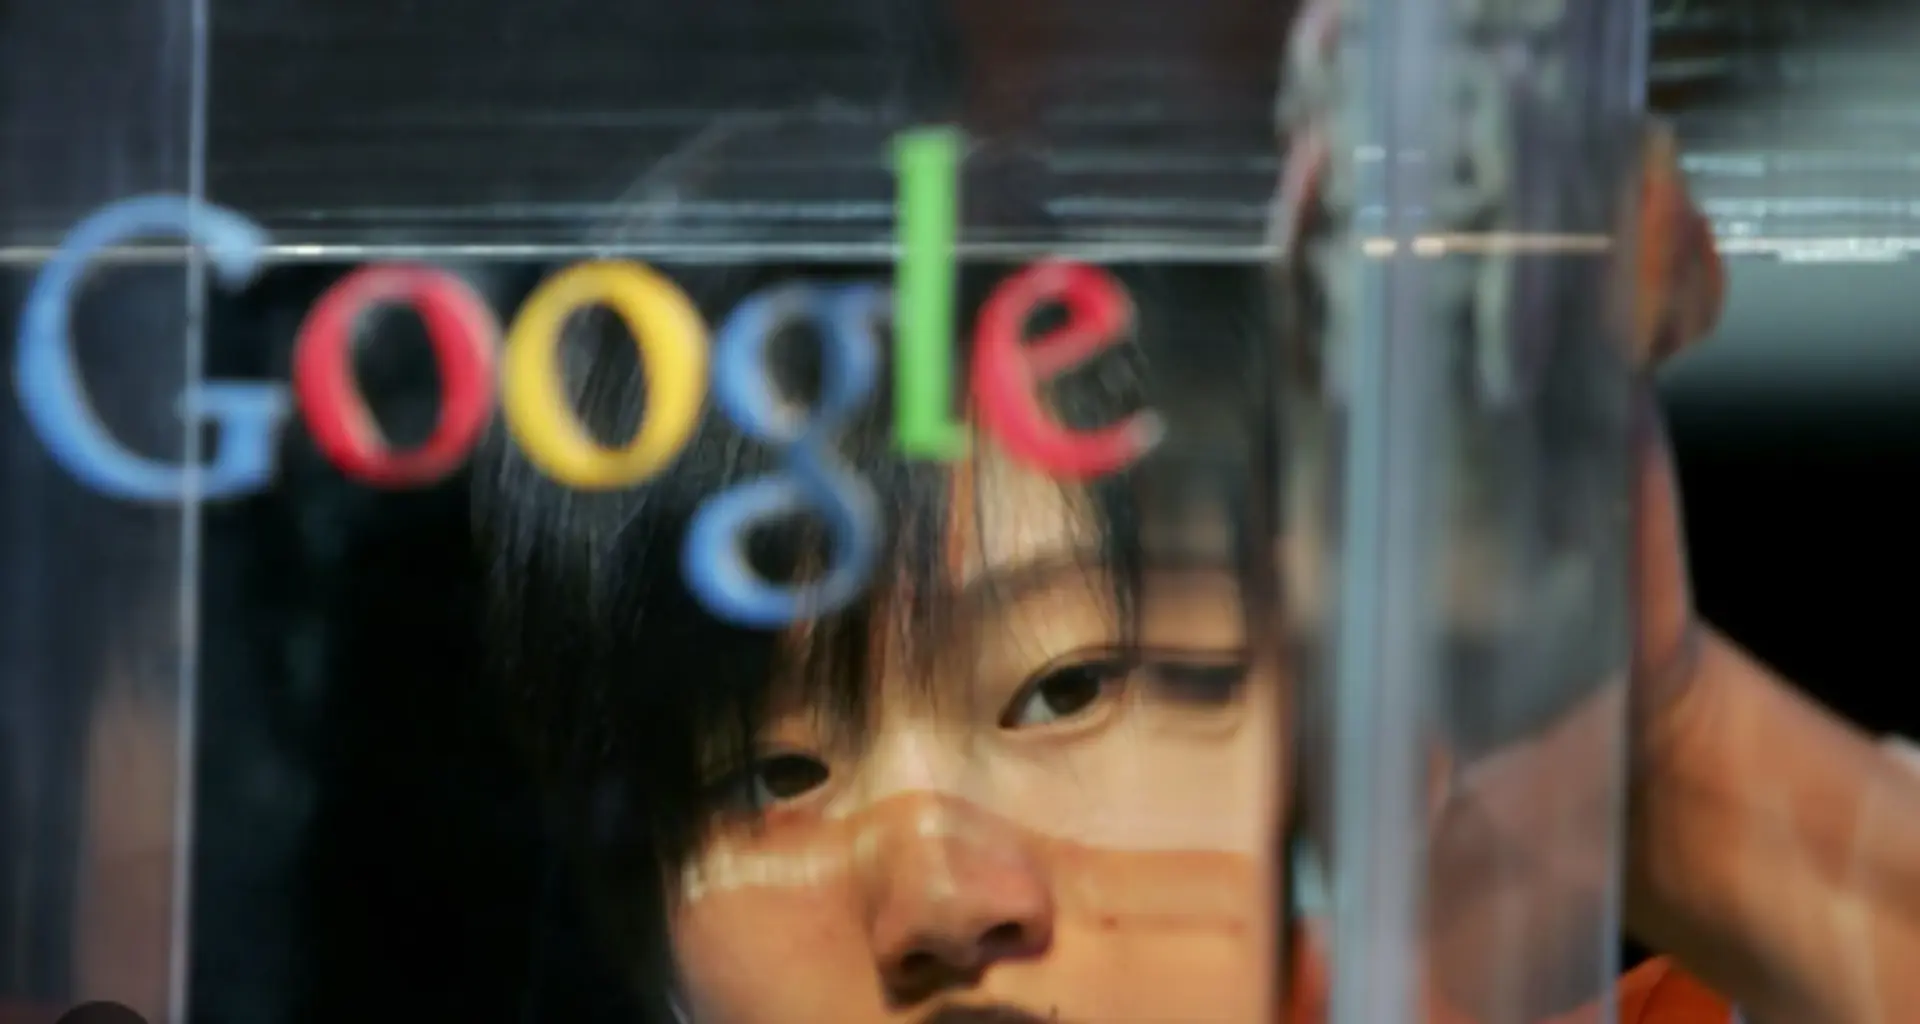 China wants to control what apps citizens use. But will Google play ball?